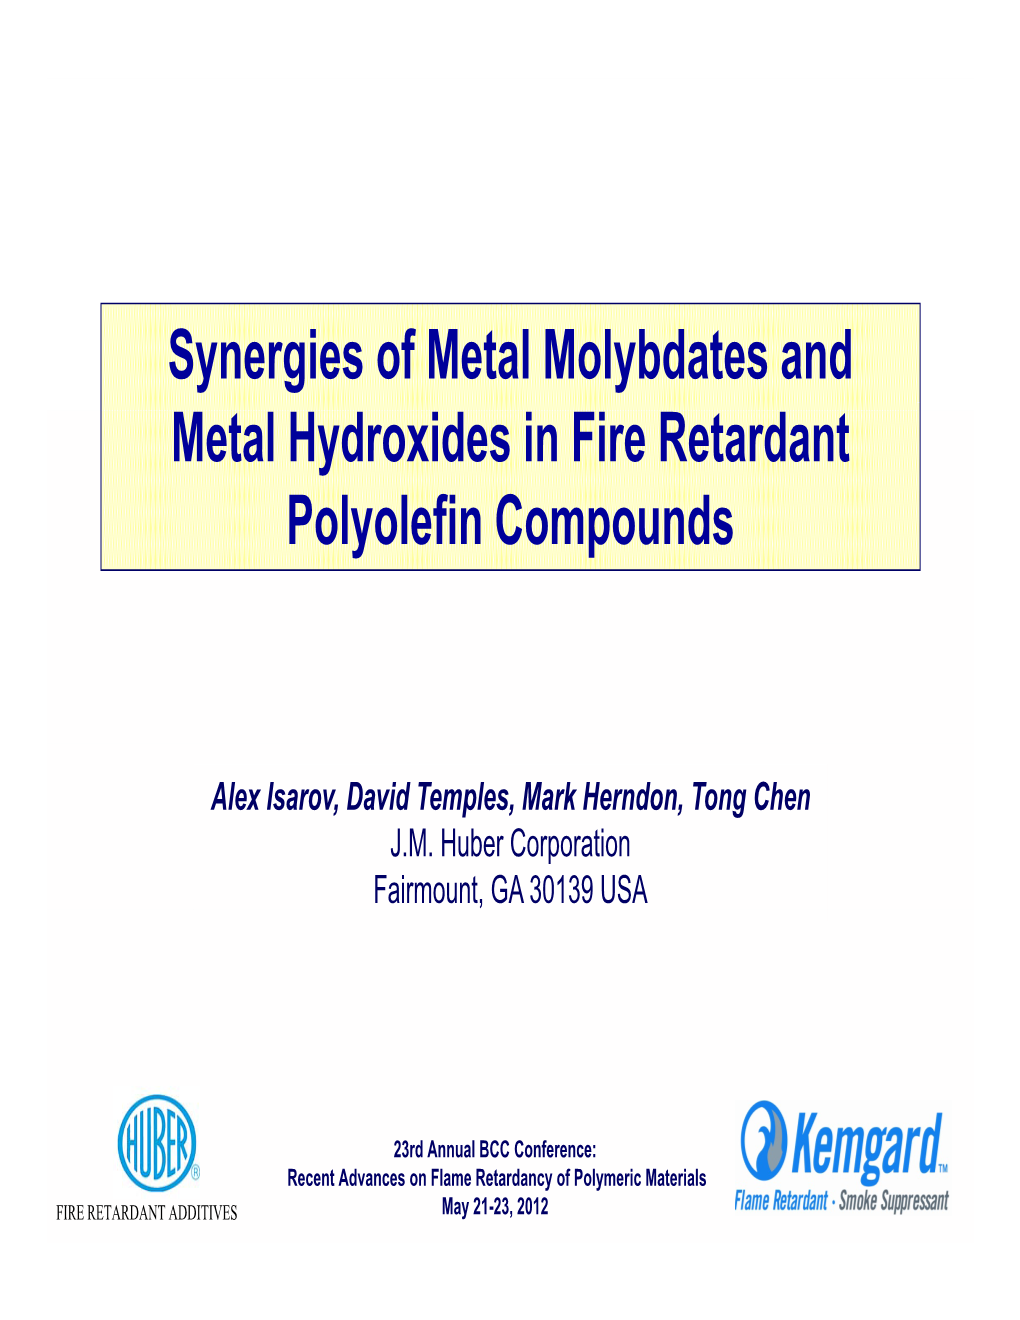 Synergies of Metal Molybdates and Metal Hydroxides in Fire Retardant Polyolefin Compounds